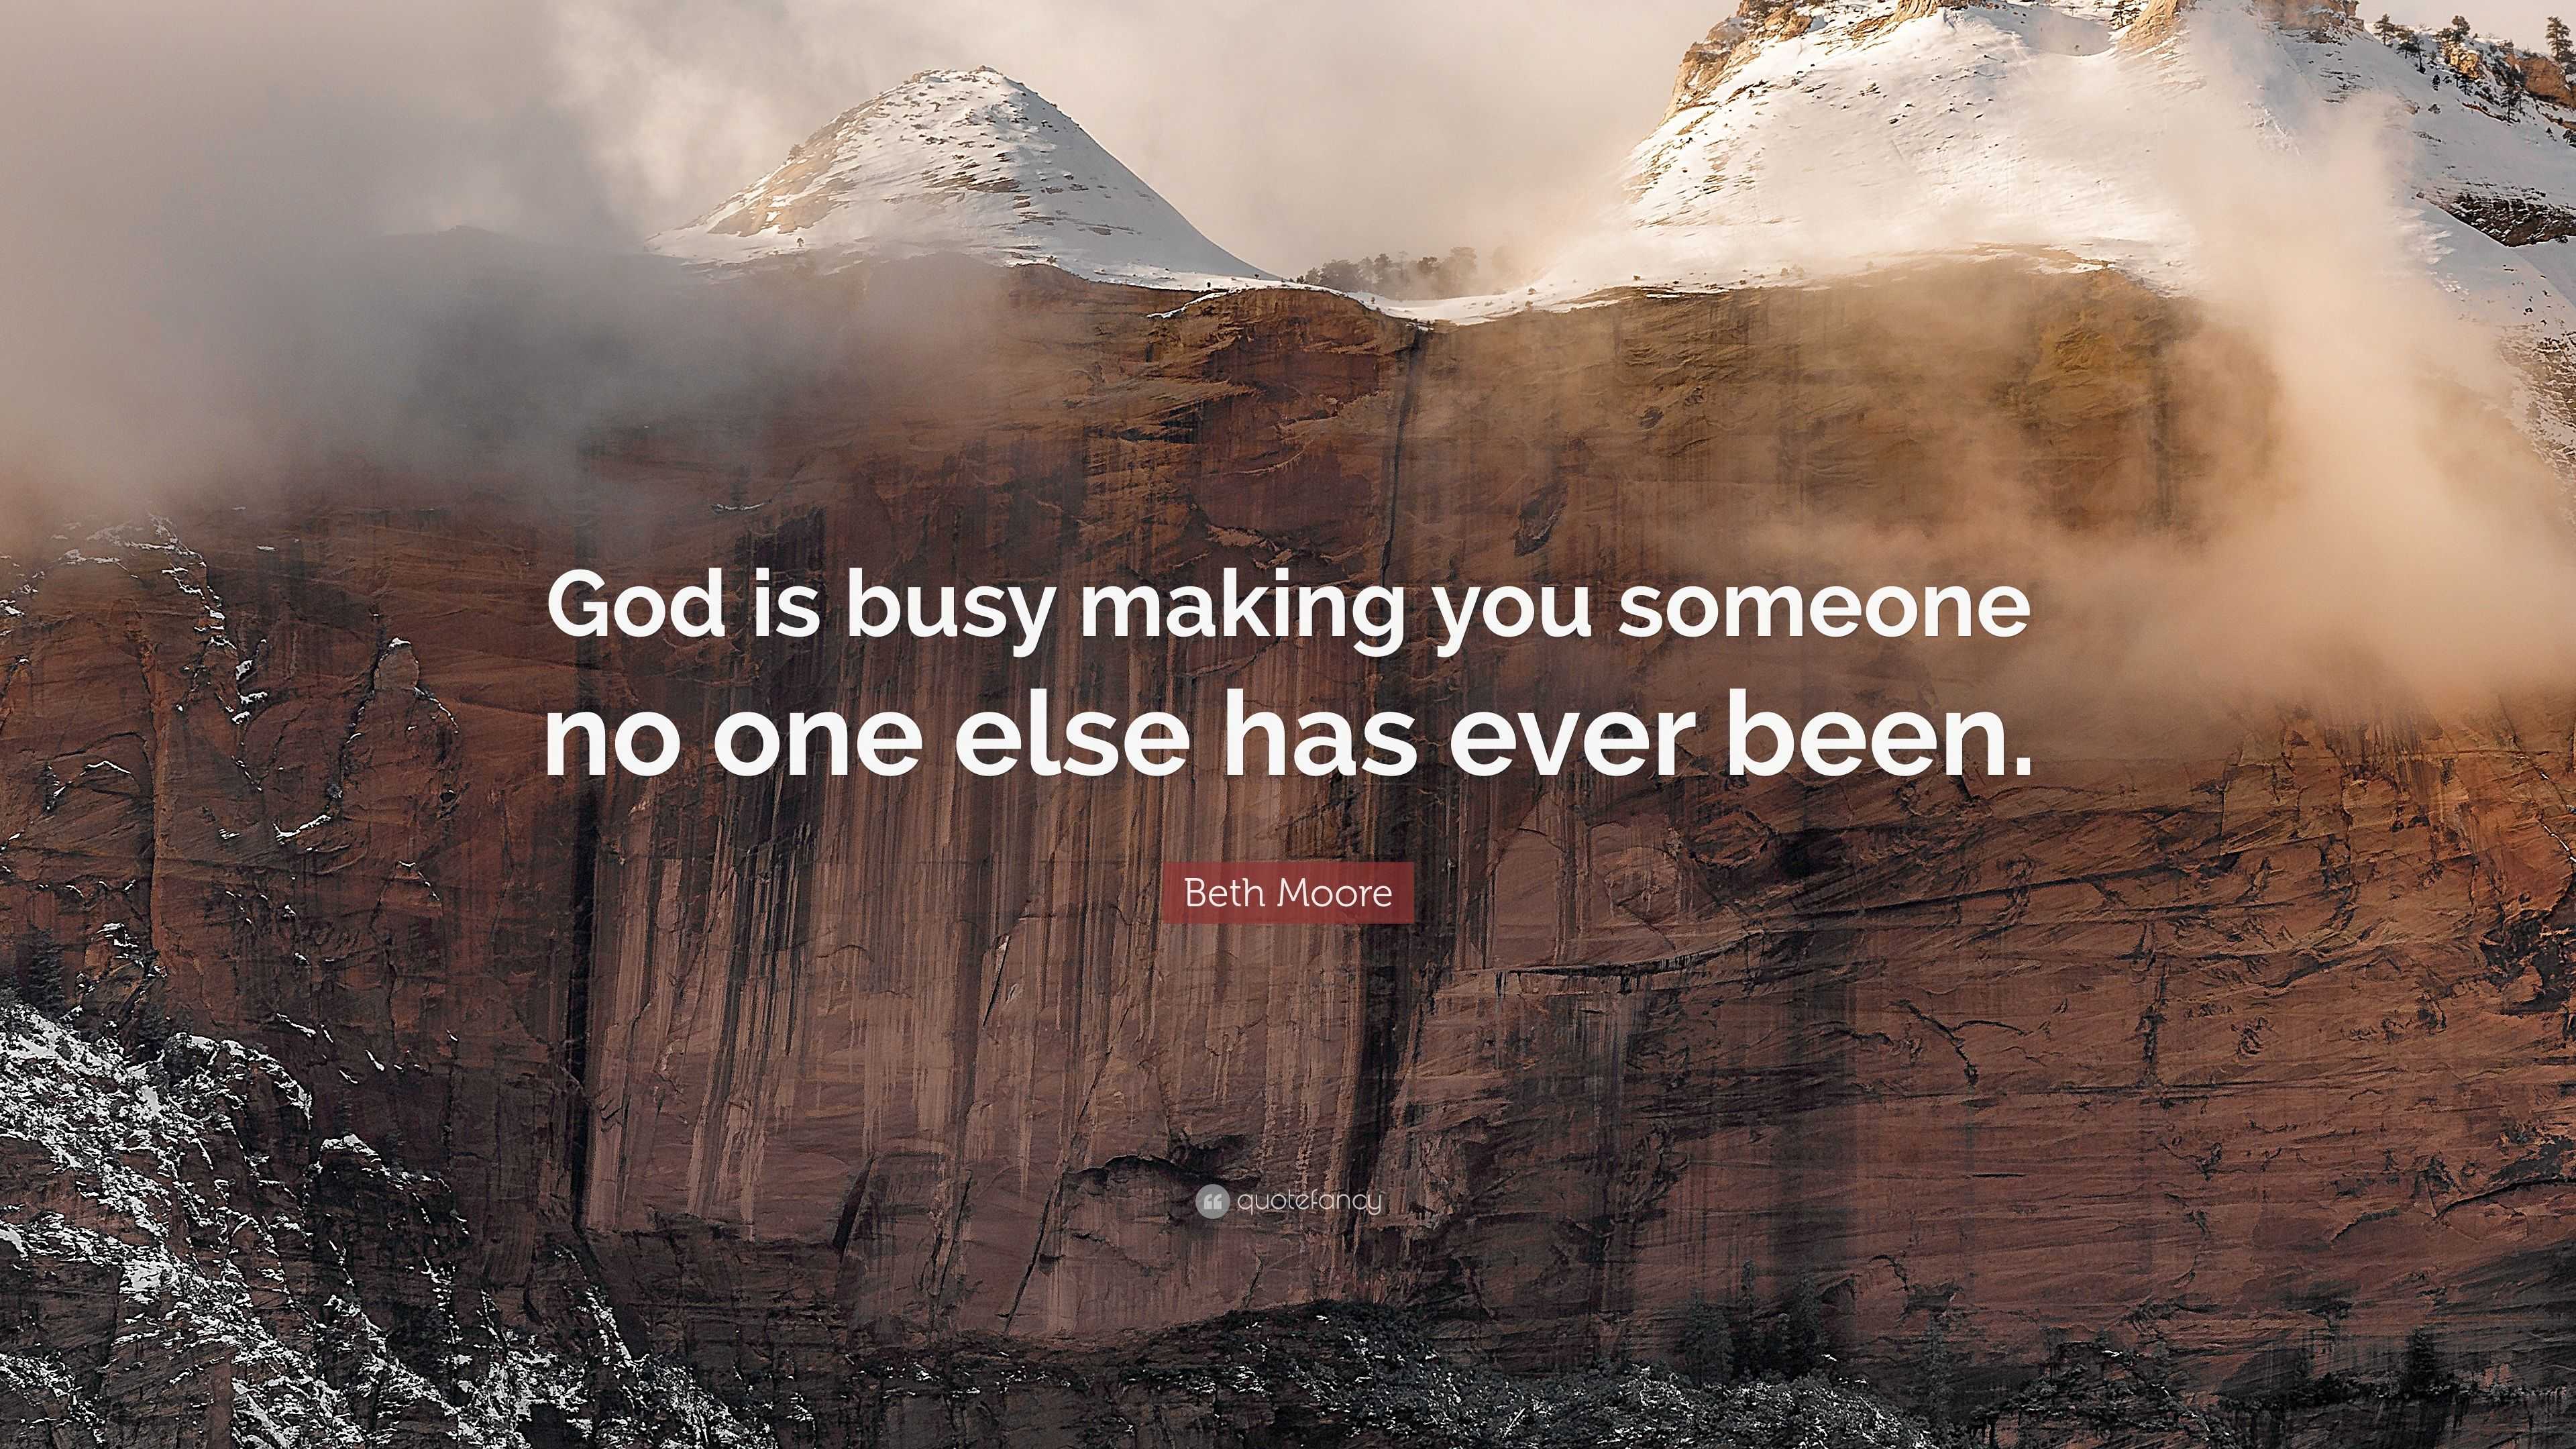 Beth Moore Quote: “God is busy making you someone no one else has ever ...